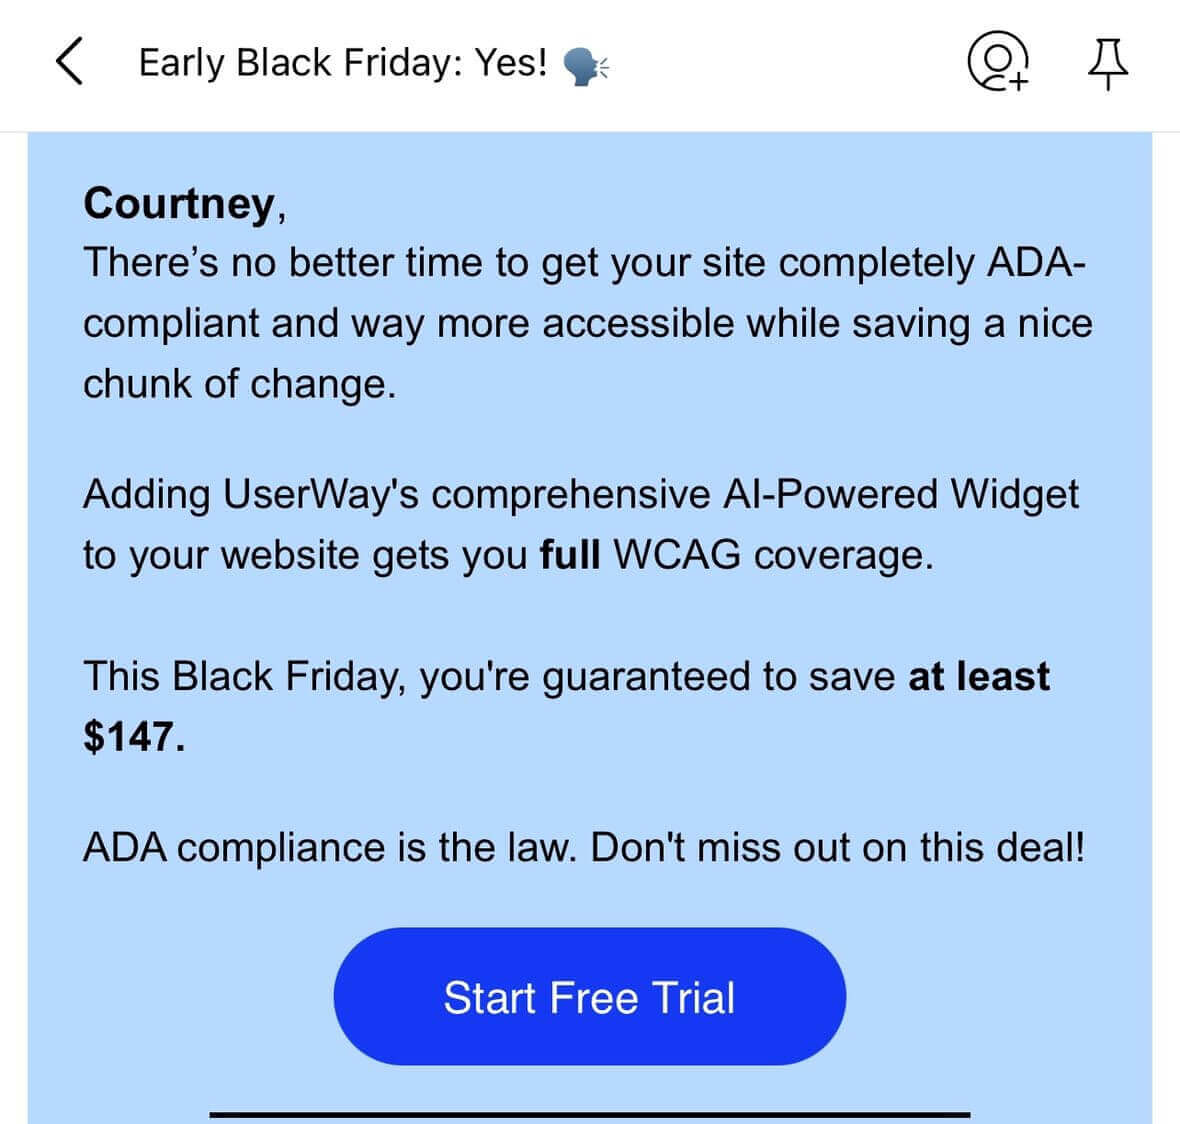 Recipient, There’s no better time to get your site completely ADA-compliant and way more accessible while saving a nice chunk of change. Adding UserWay’s comprehensive AI-Powered Widget to your website gets you full WCAG coverage. This Black Friday, you’re guaranteed to save at least $147. ADA complians is the law. Don’t miss out on this deal! Start Free Trial.